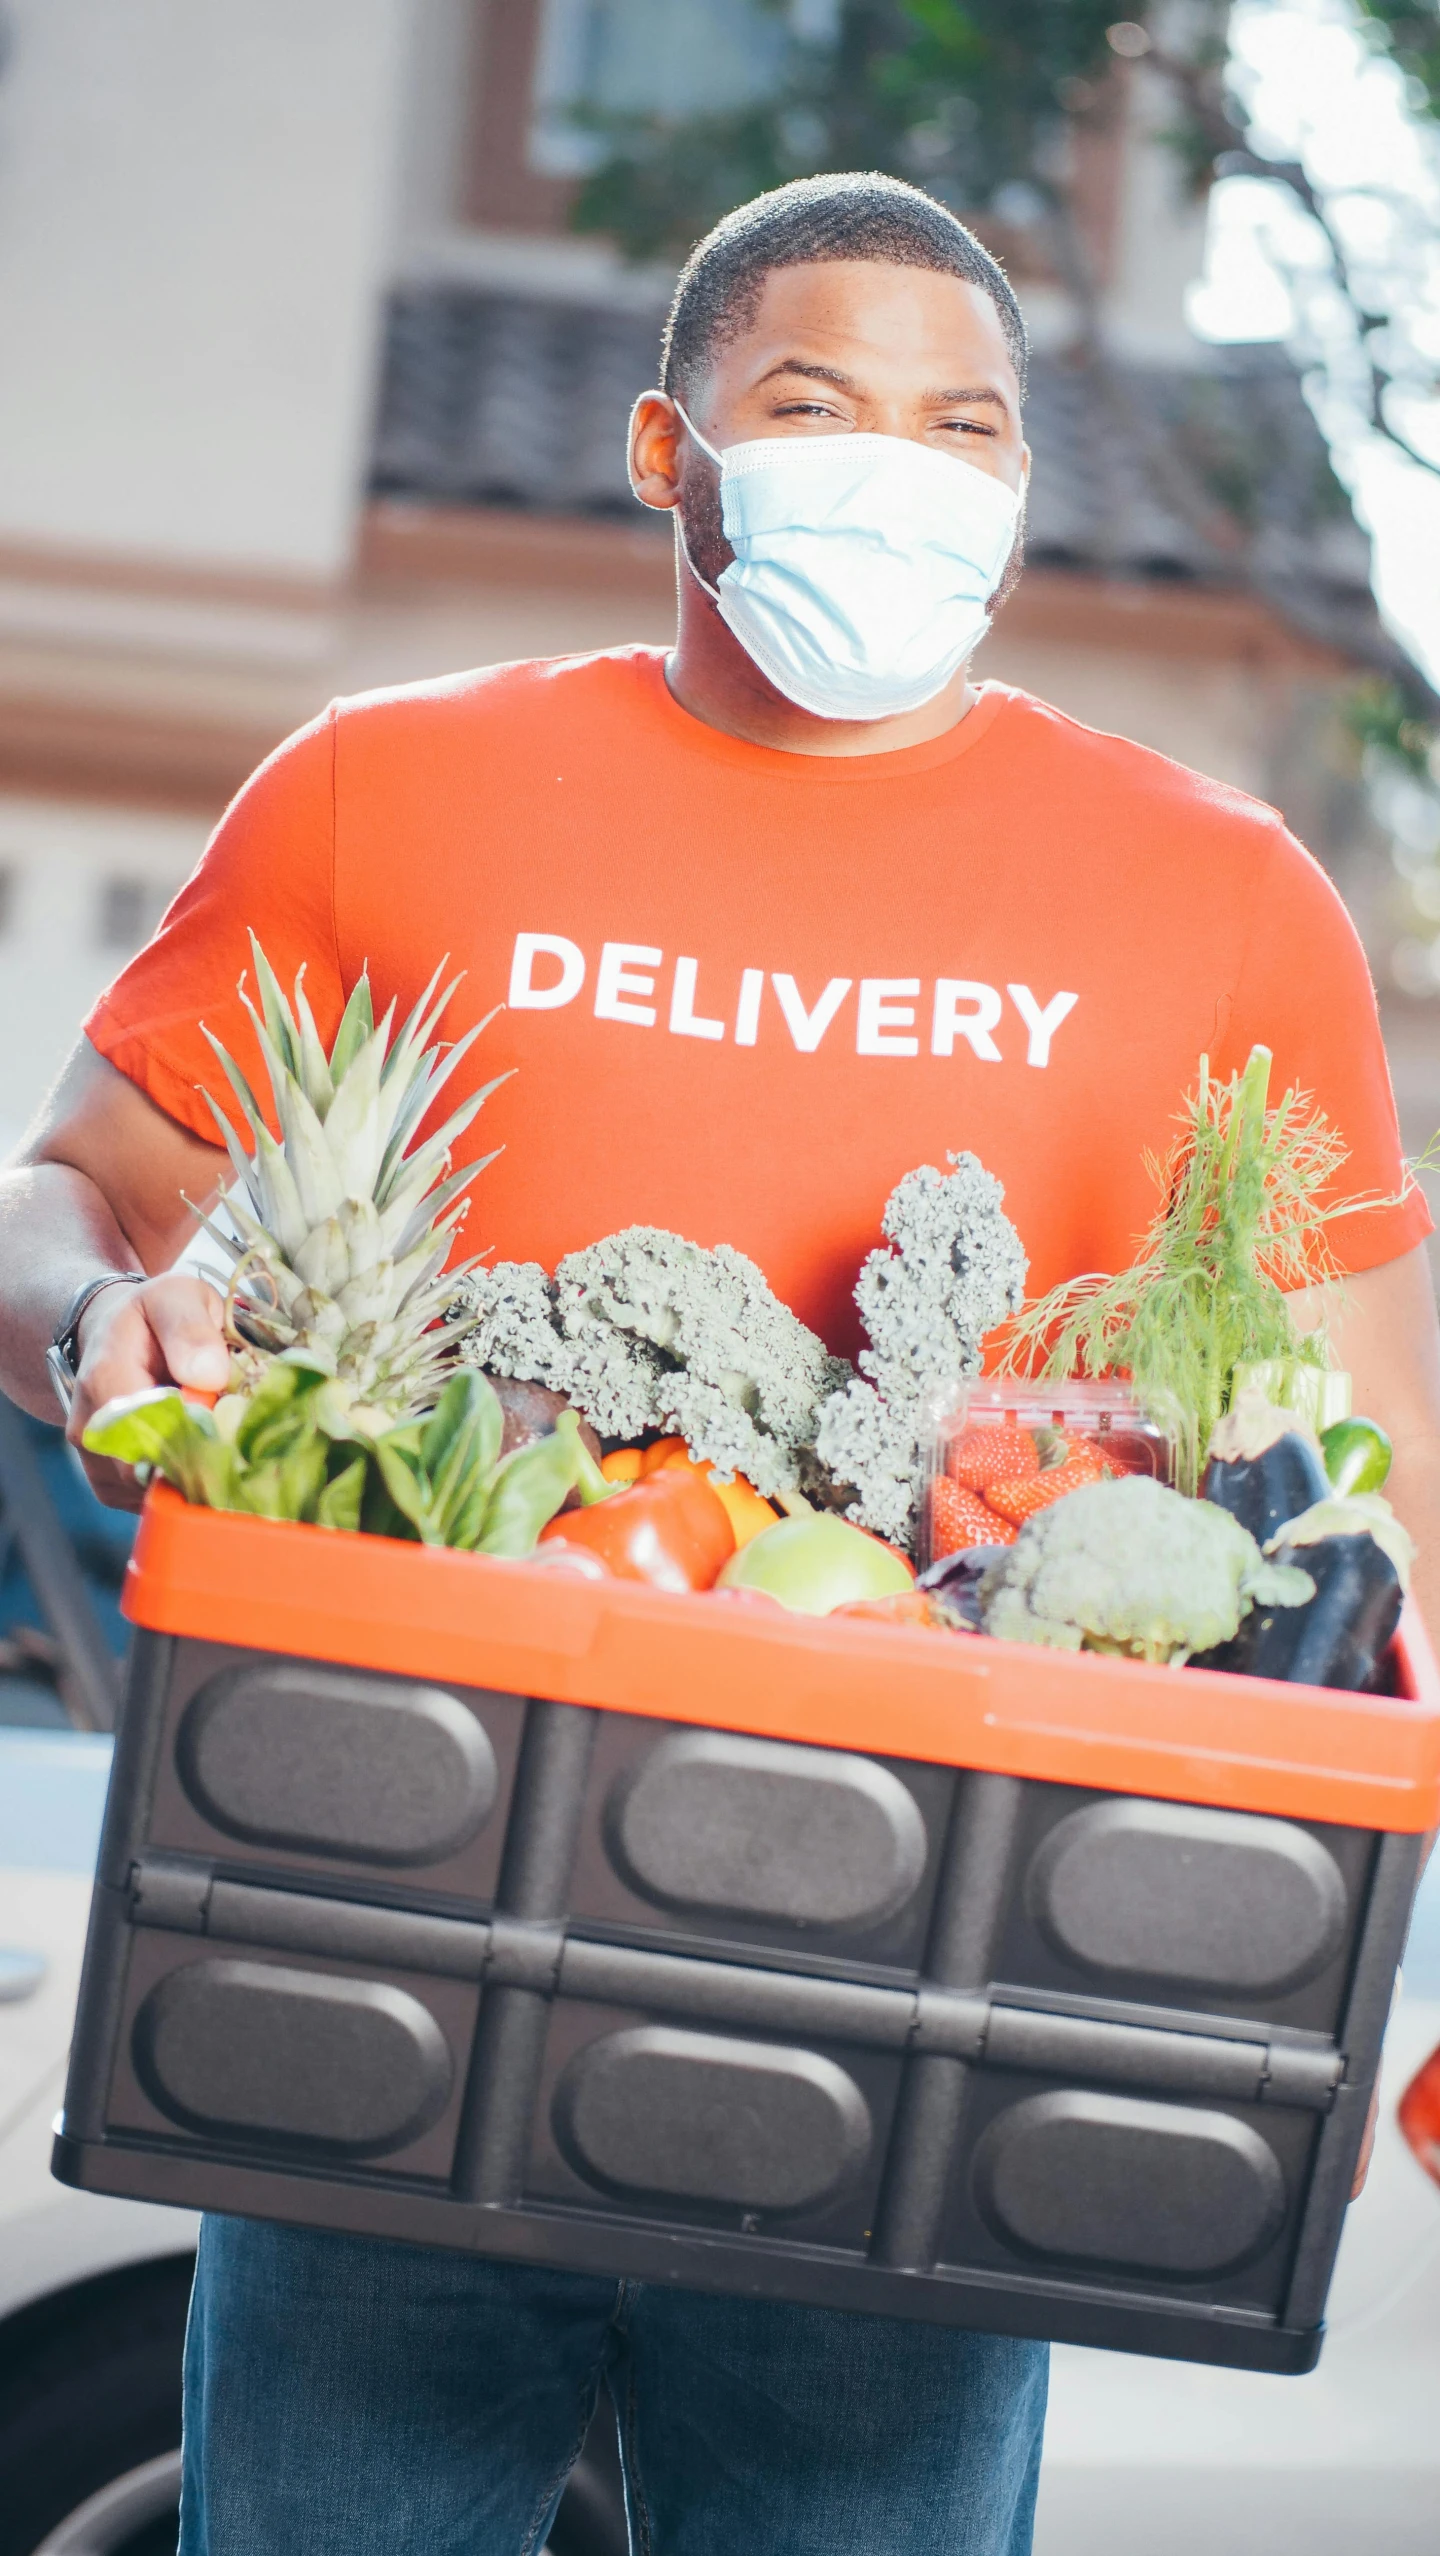 a man wearing a face mask holding a box of fruit and vegetables, a digital rendering, pexels, hurufiyya, wearing an orange t-shirt, exiting store, logo for lunch delivery, square